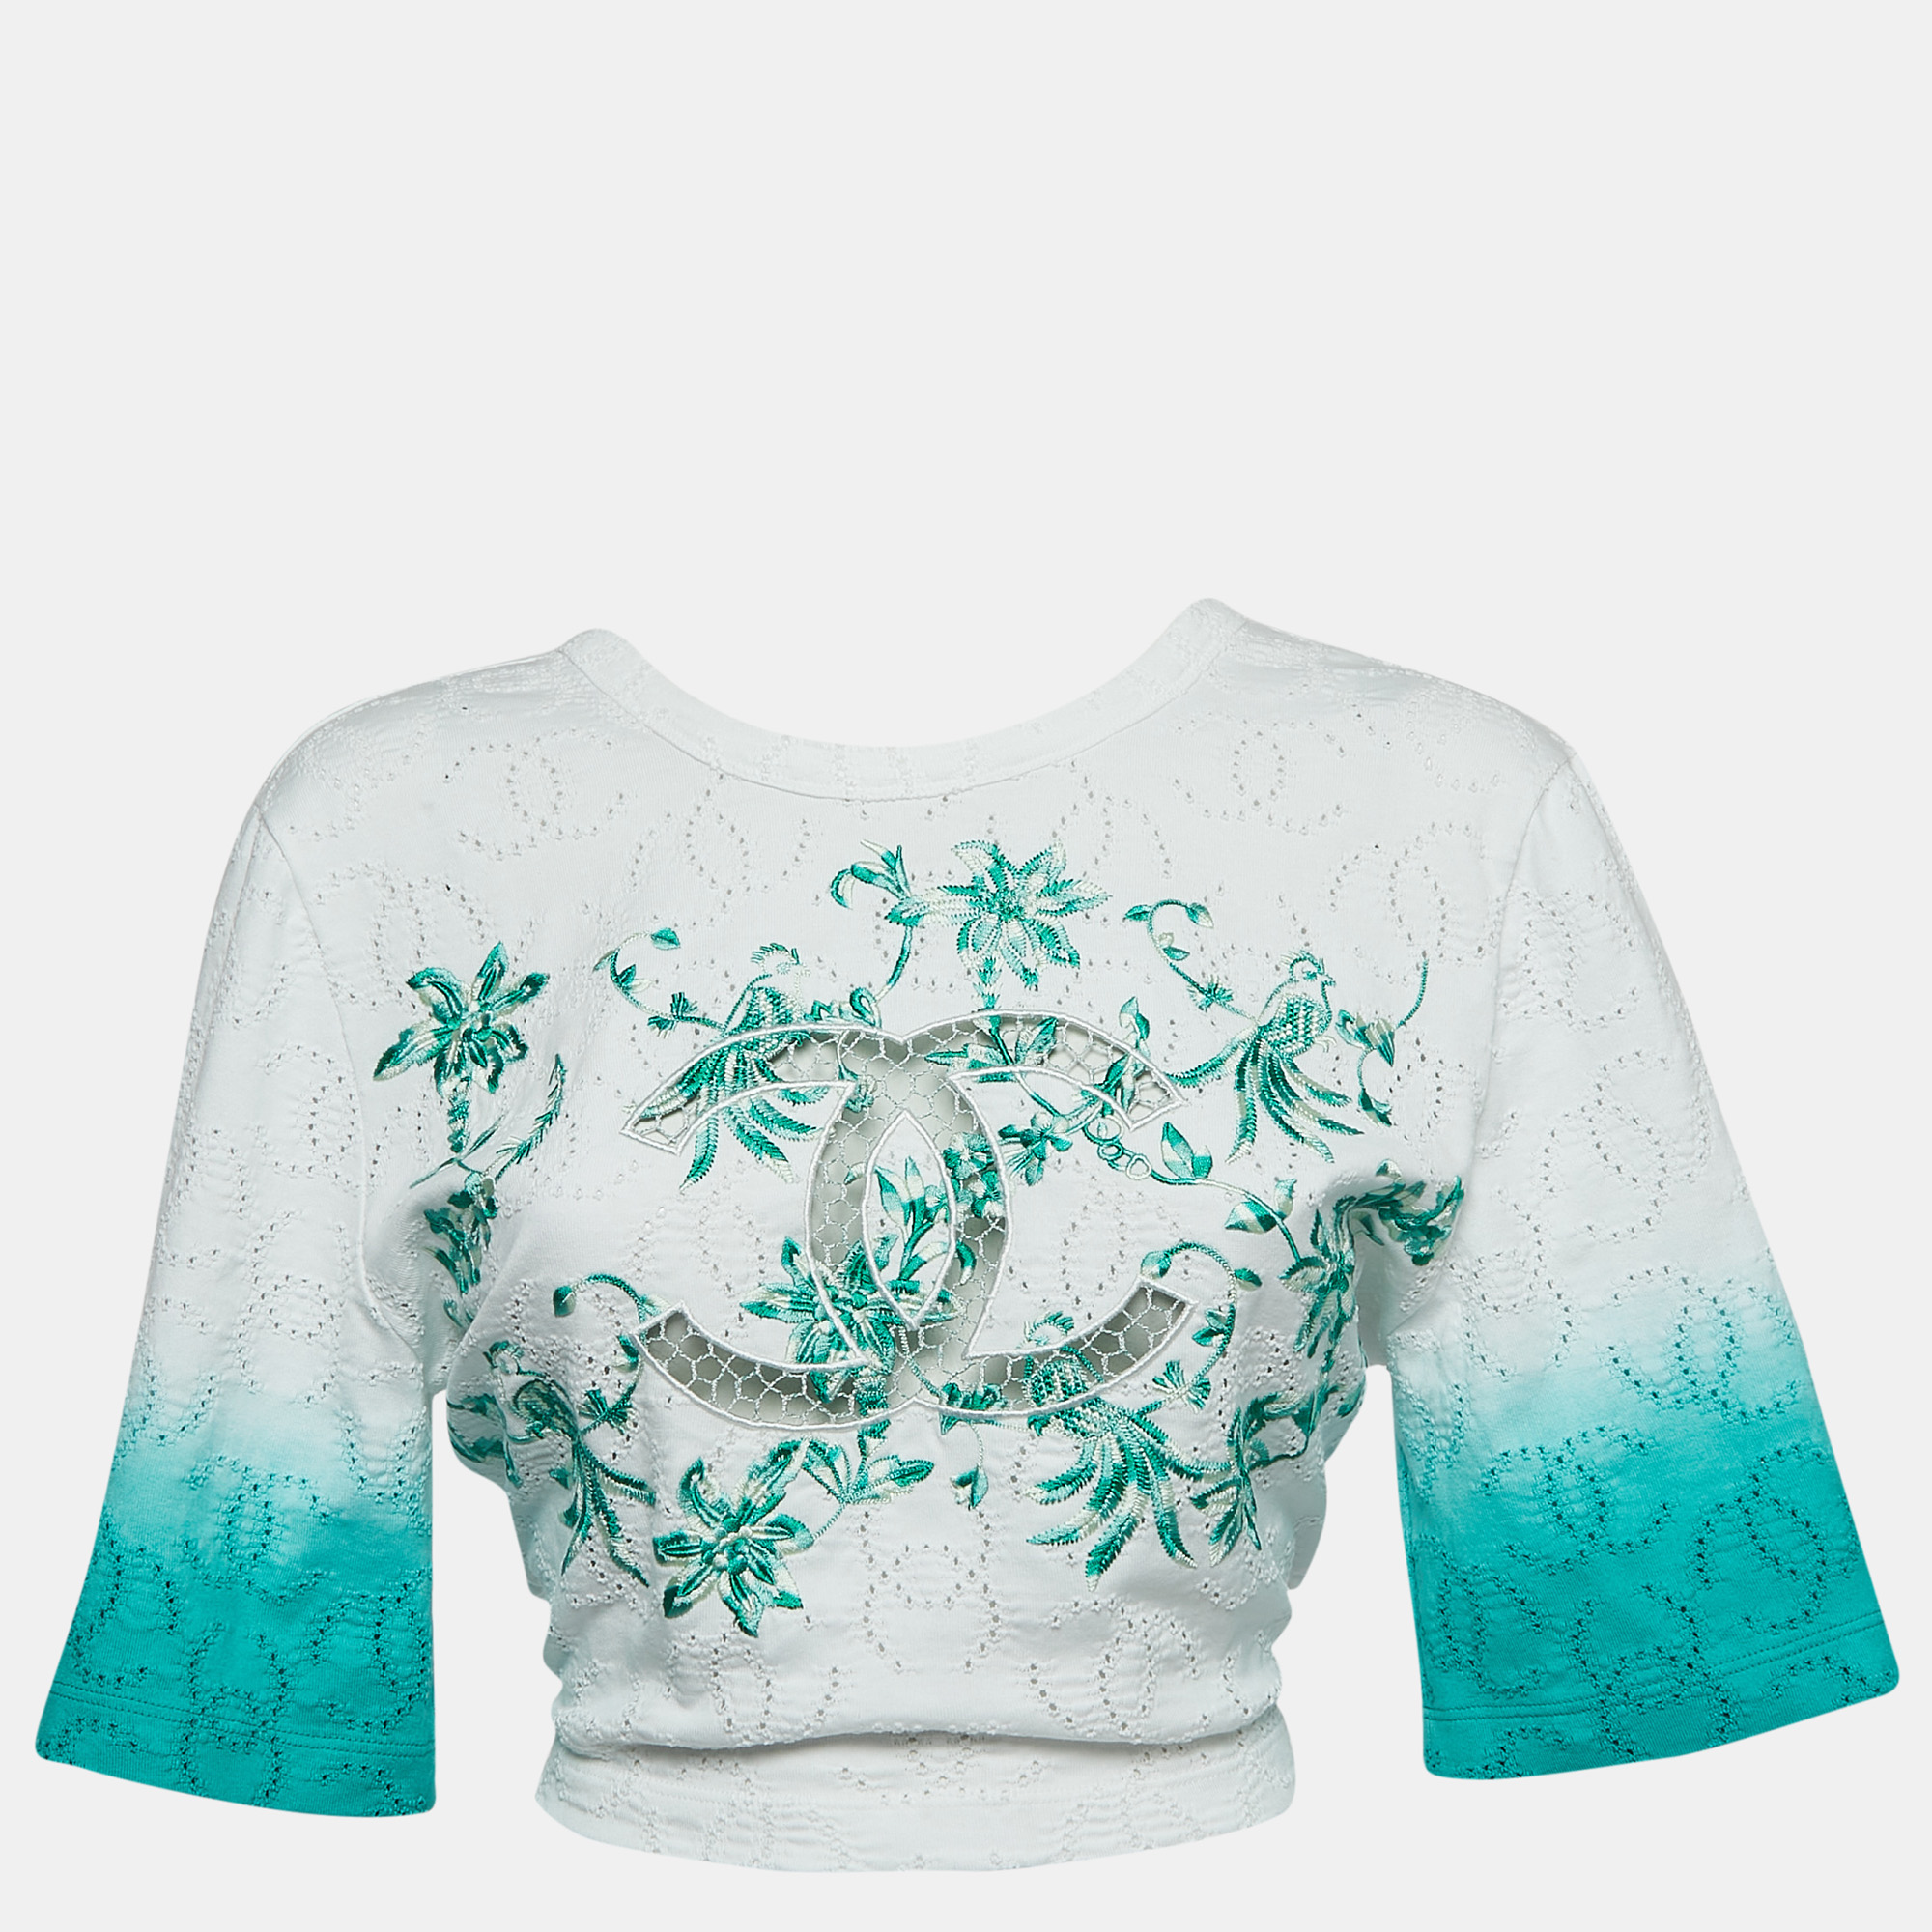 Chanel white/green ombre cotton knit twisted logo cutout crop top s